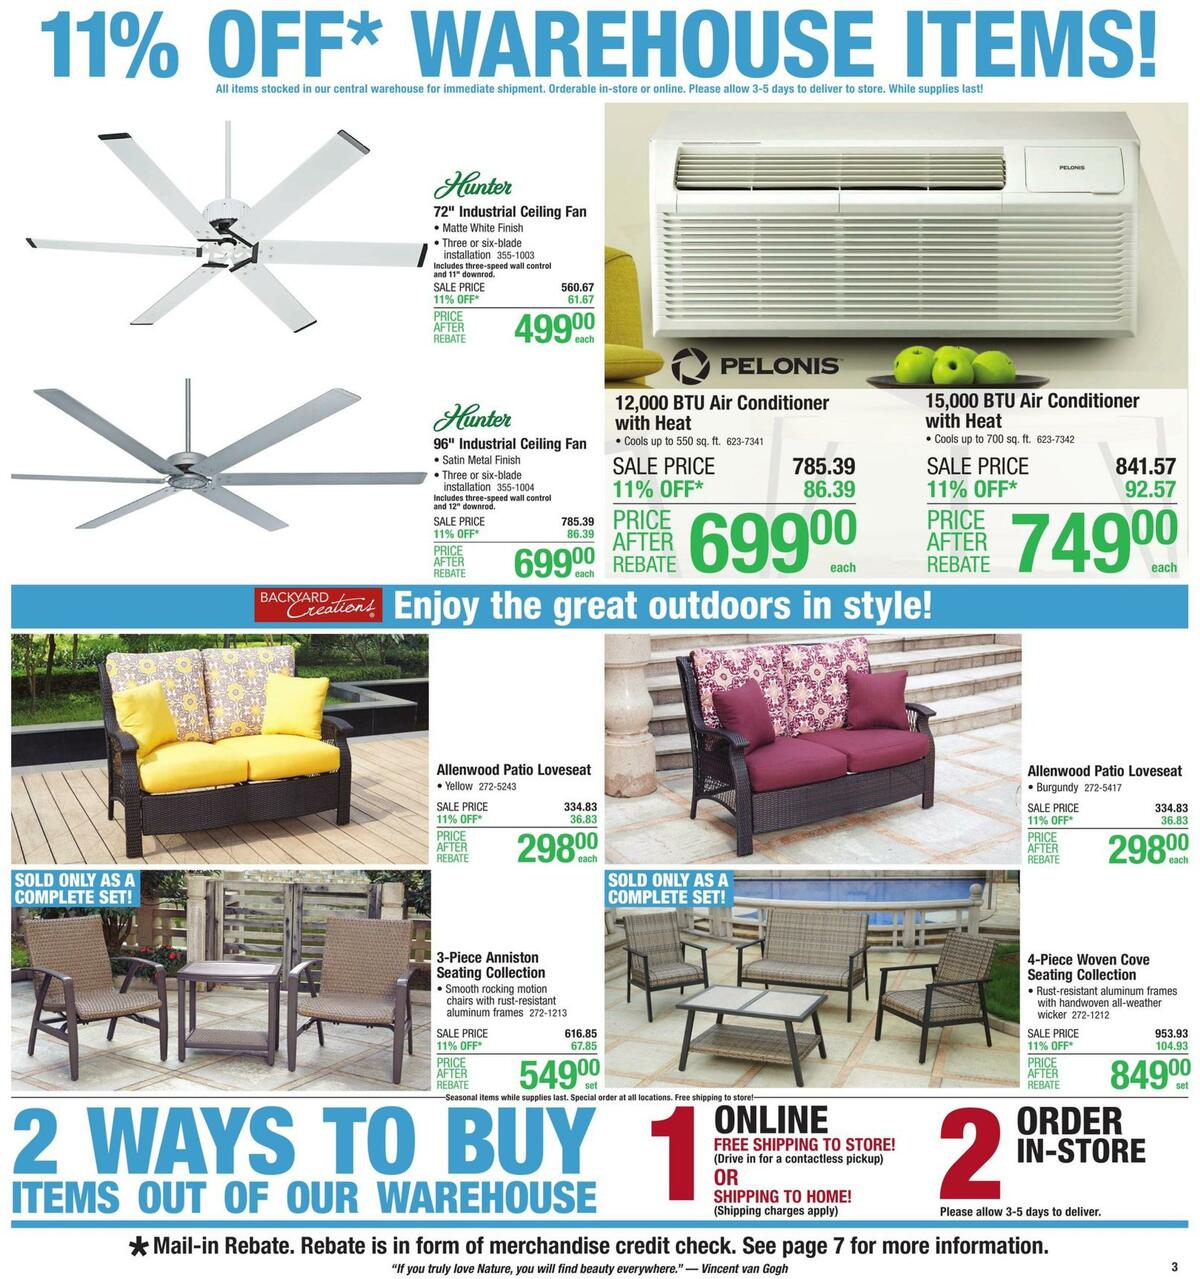 Menards Weekly Ad from August 16